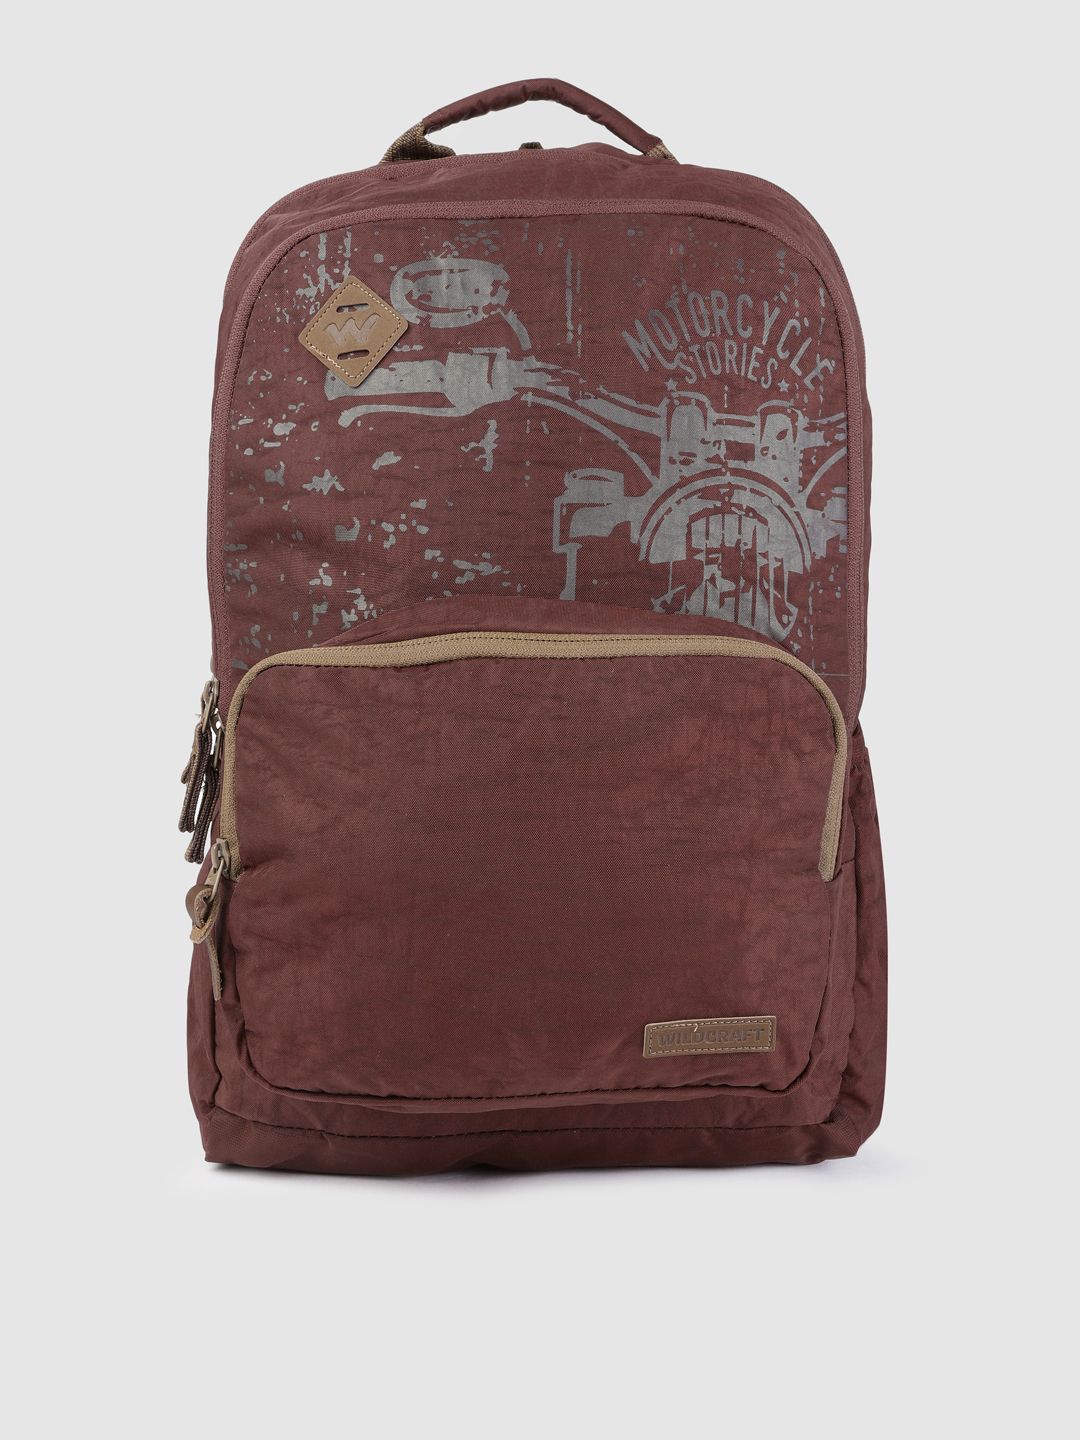 Wildcraft Unisex Maroon Graphic Storm2 Laptop Backpack Price in India